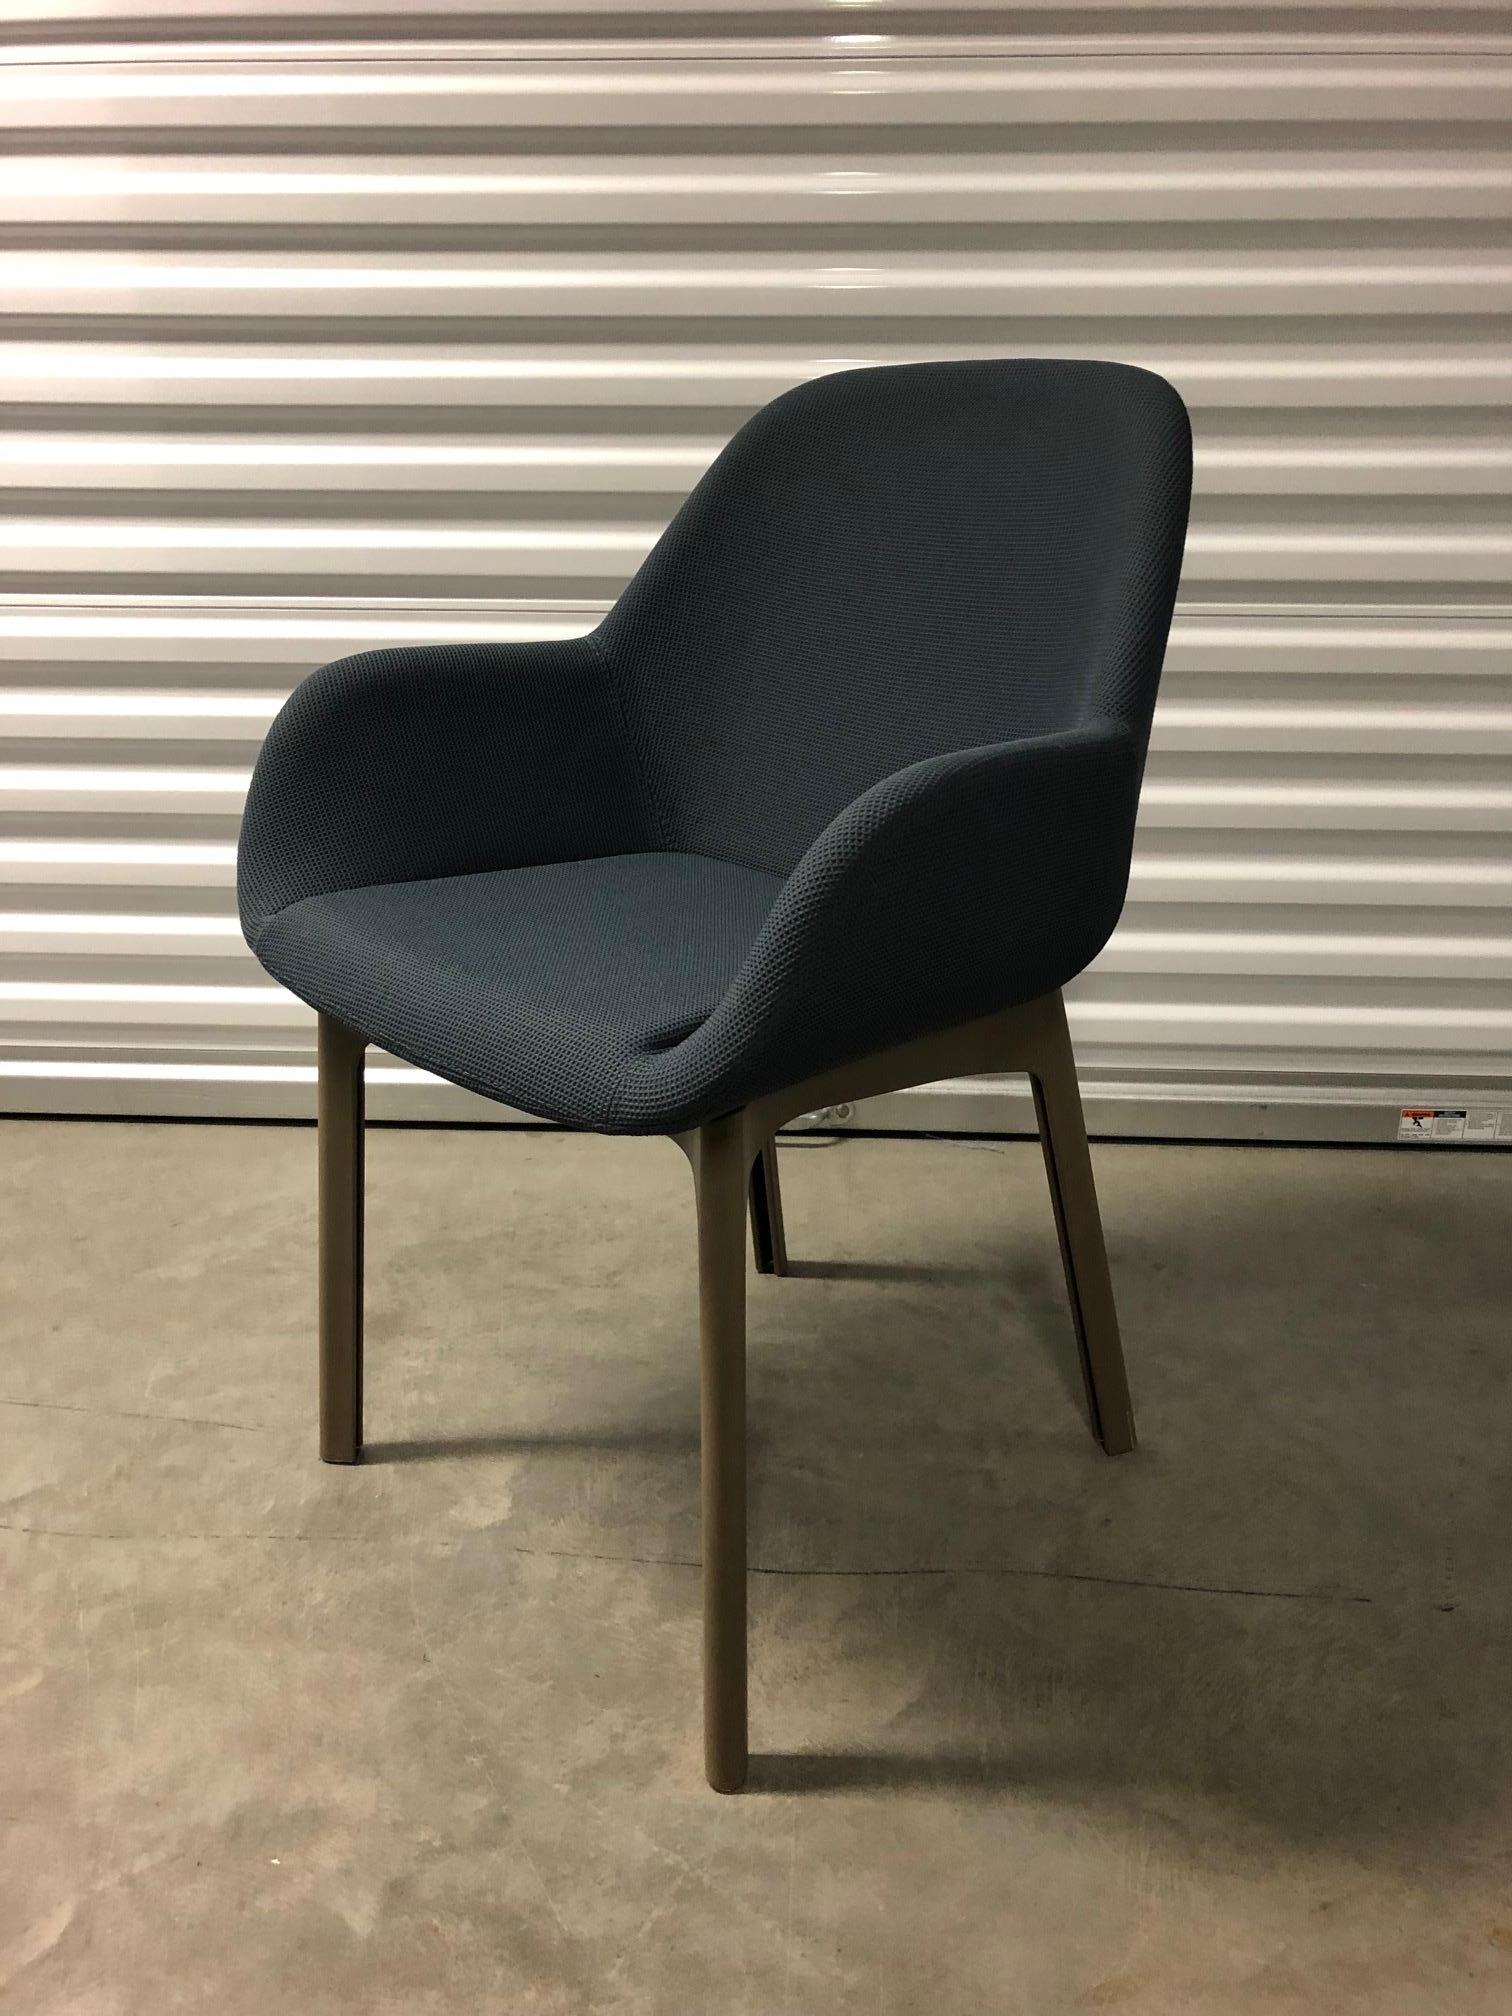 Kartell Clap chair designed by Patricia Urquiola. The armchair bearing the was specially designed for the contract sector and to extend Kartell’s Soft line. Tortoise colored technopolymer legs with dark gray solid colored Trevira upholstery.